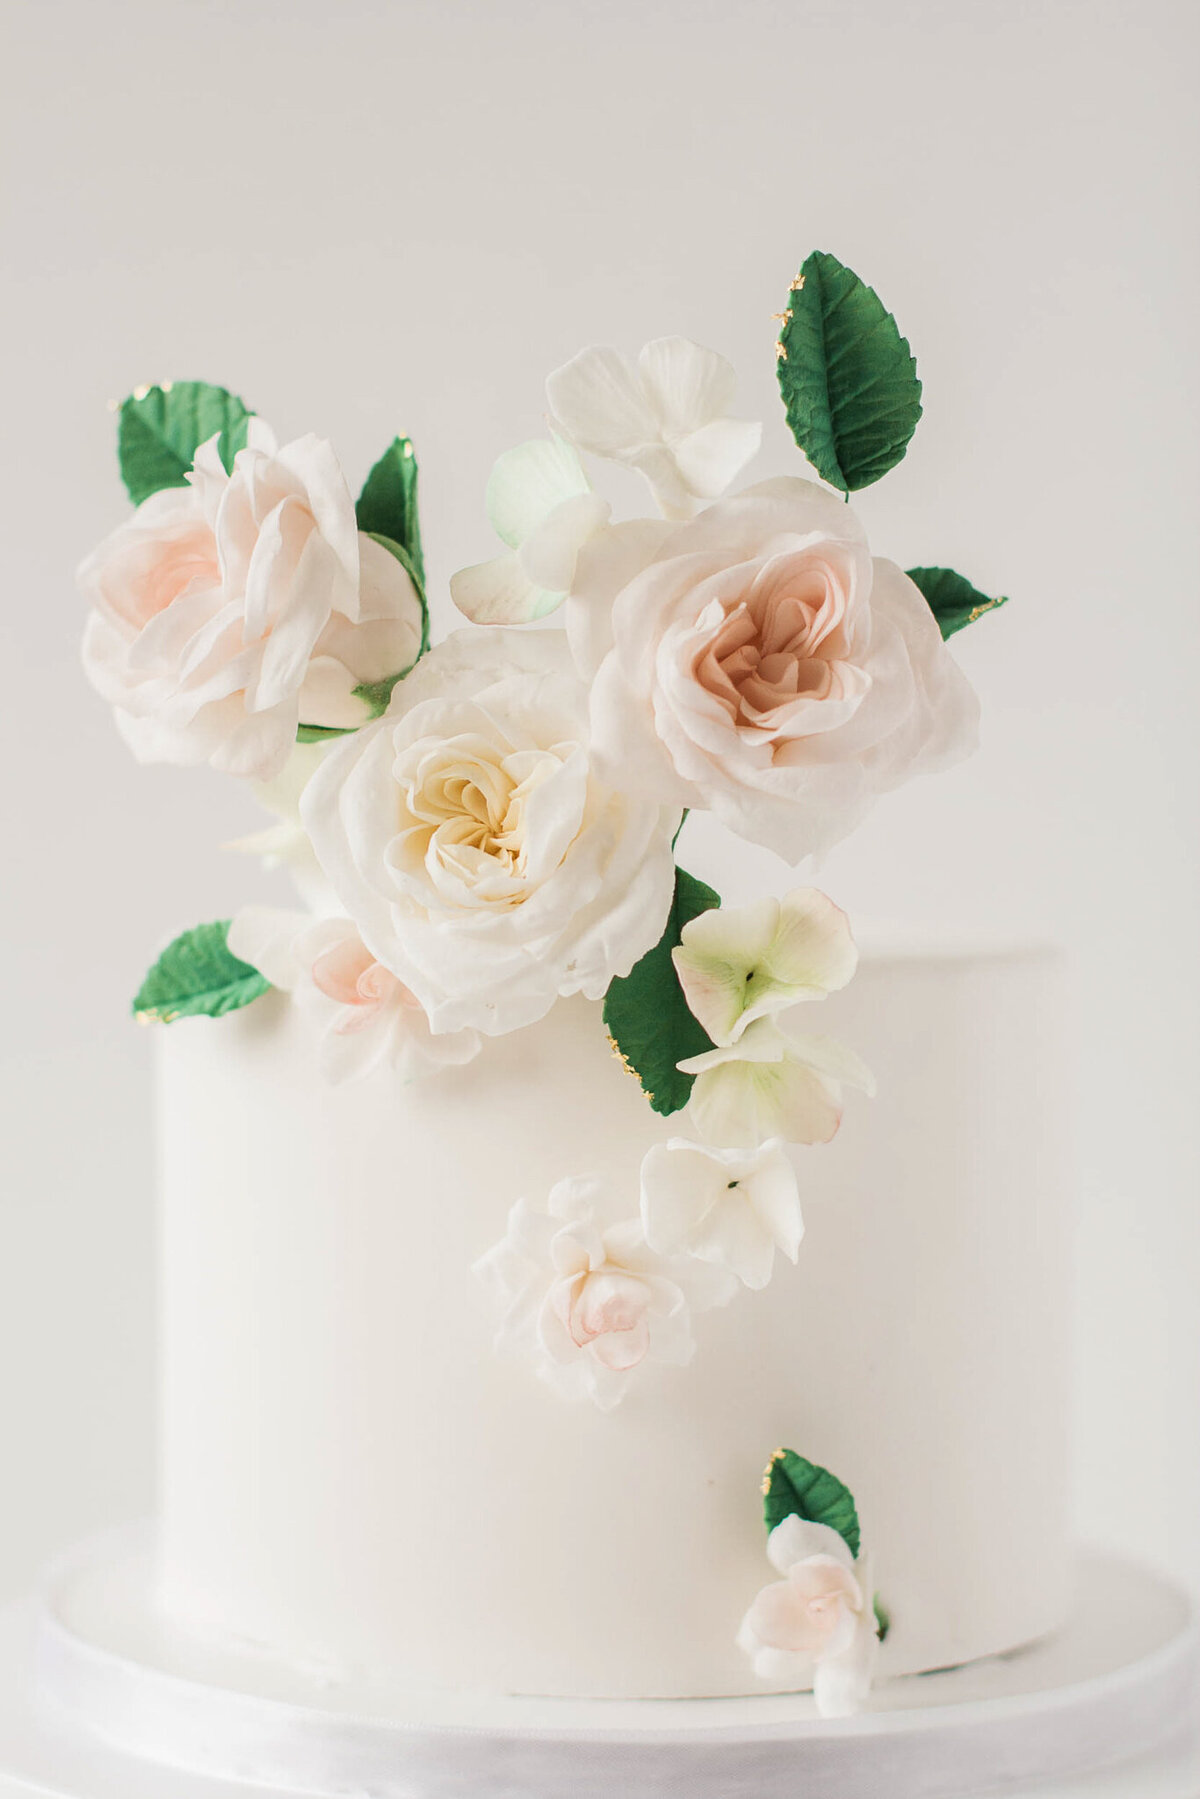 Simple and elegant one-tiered white wedding cake with life like sugar flowers, created by Brianne Gabrielle Cakes,  elegant cakes & desserts in Edmonton, AB, featured on the Brontë Bride Vendor Guide.